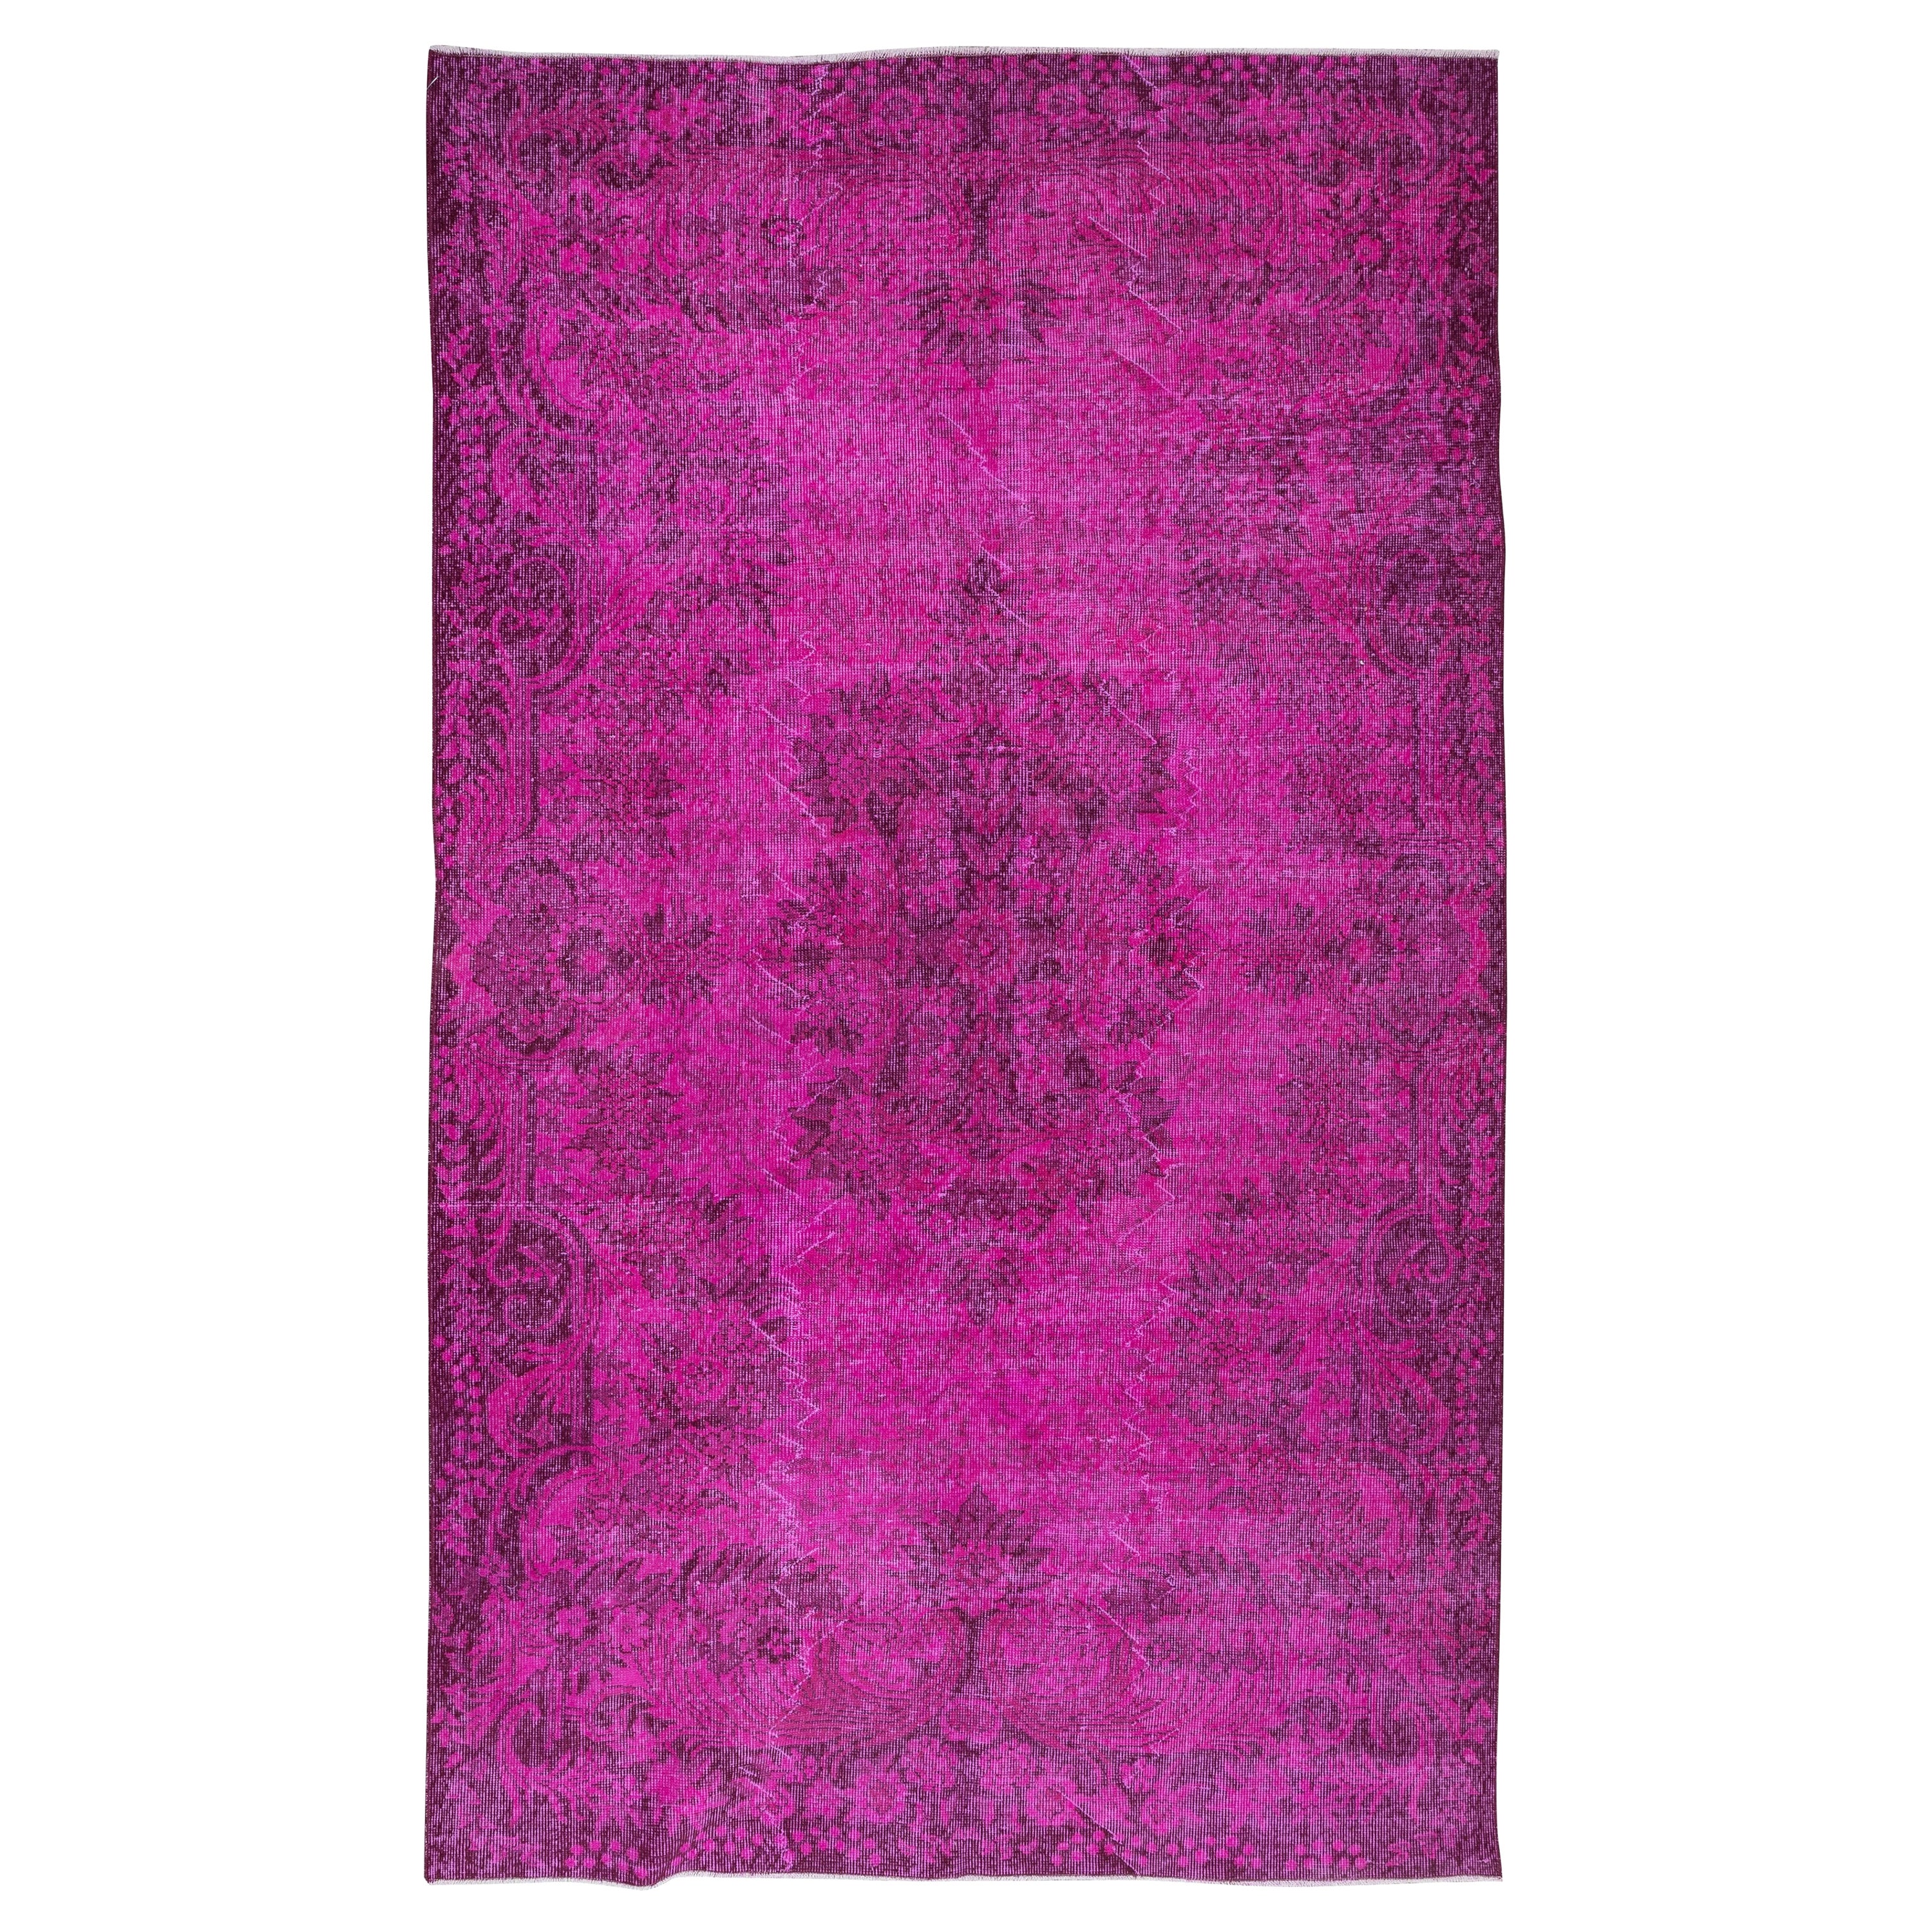 5.8x9.6 Ft Pink Area Rug, Handknotted in Turkey, Ideal for Modern Interiors For Sale